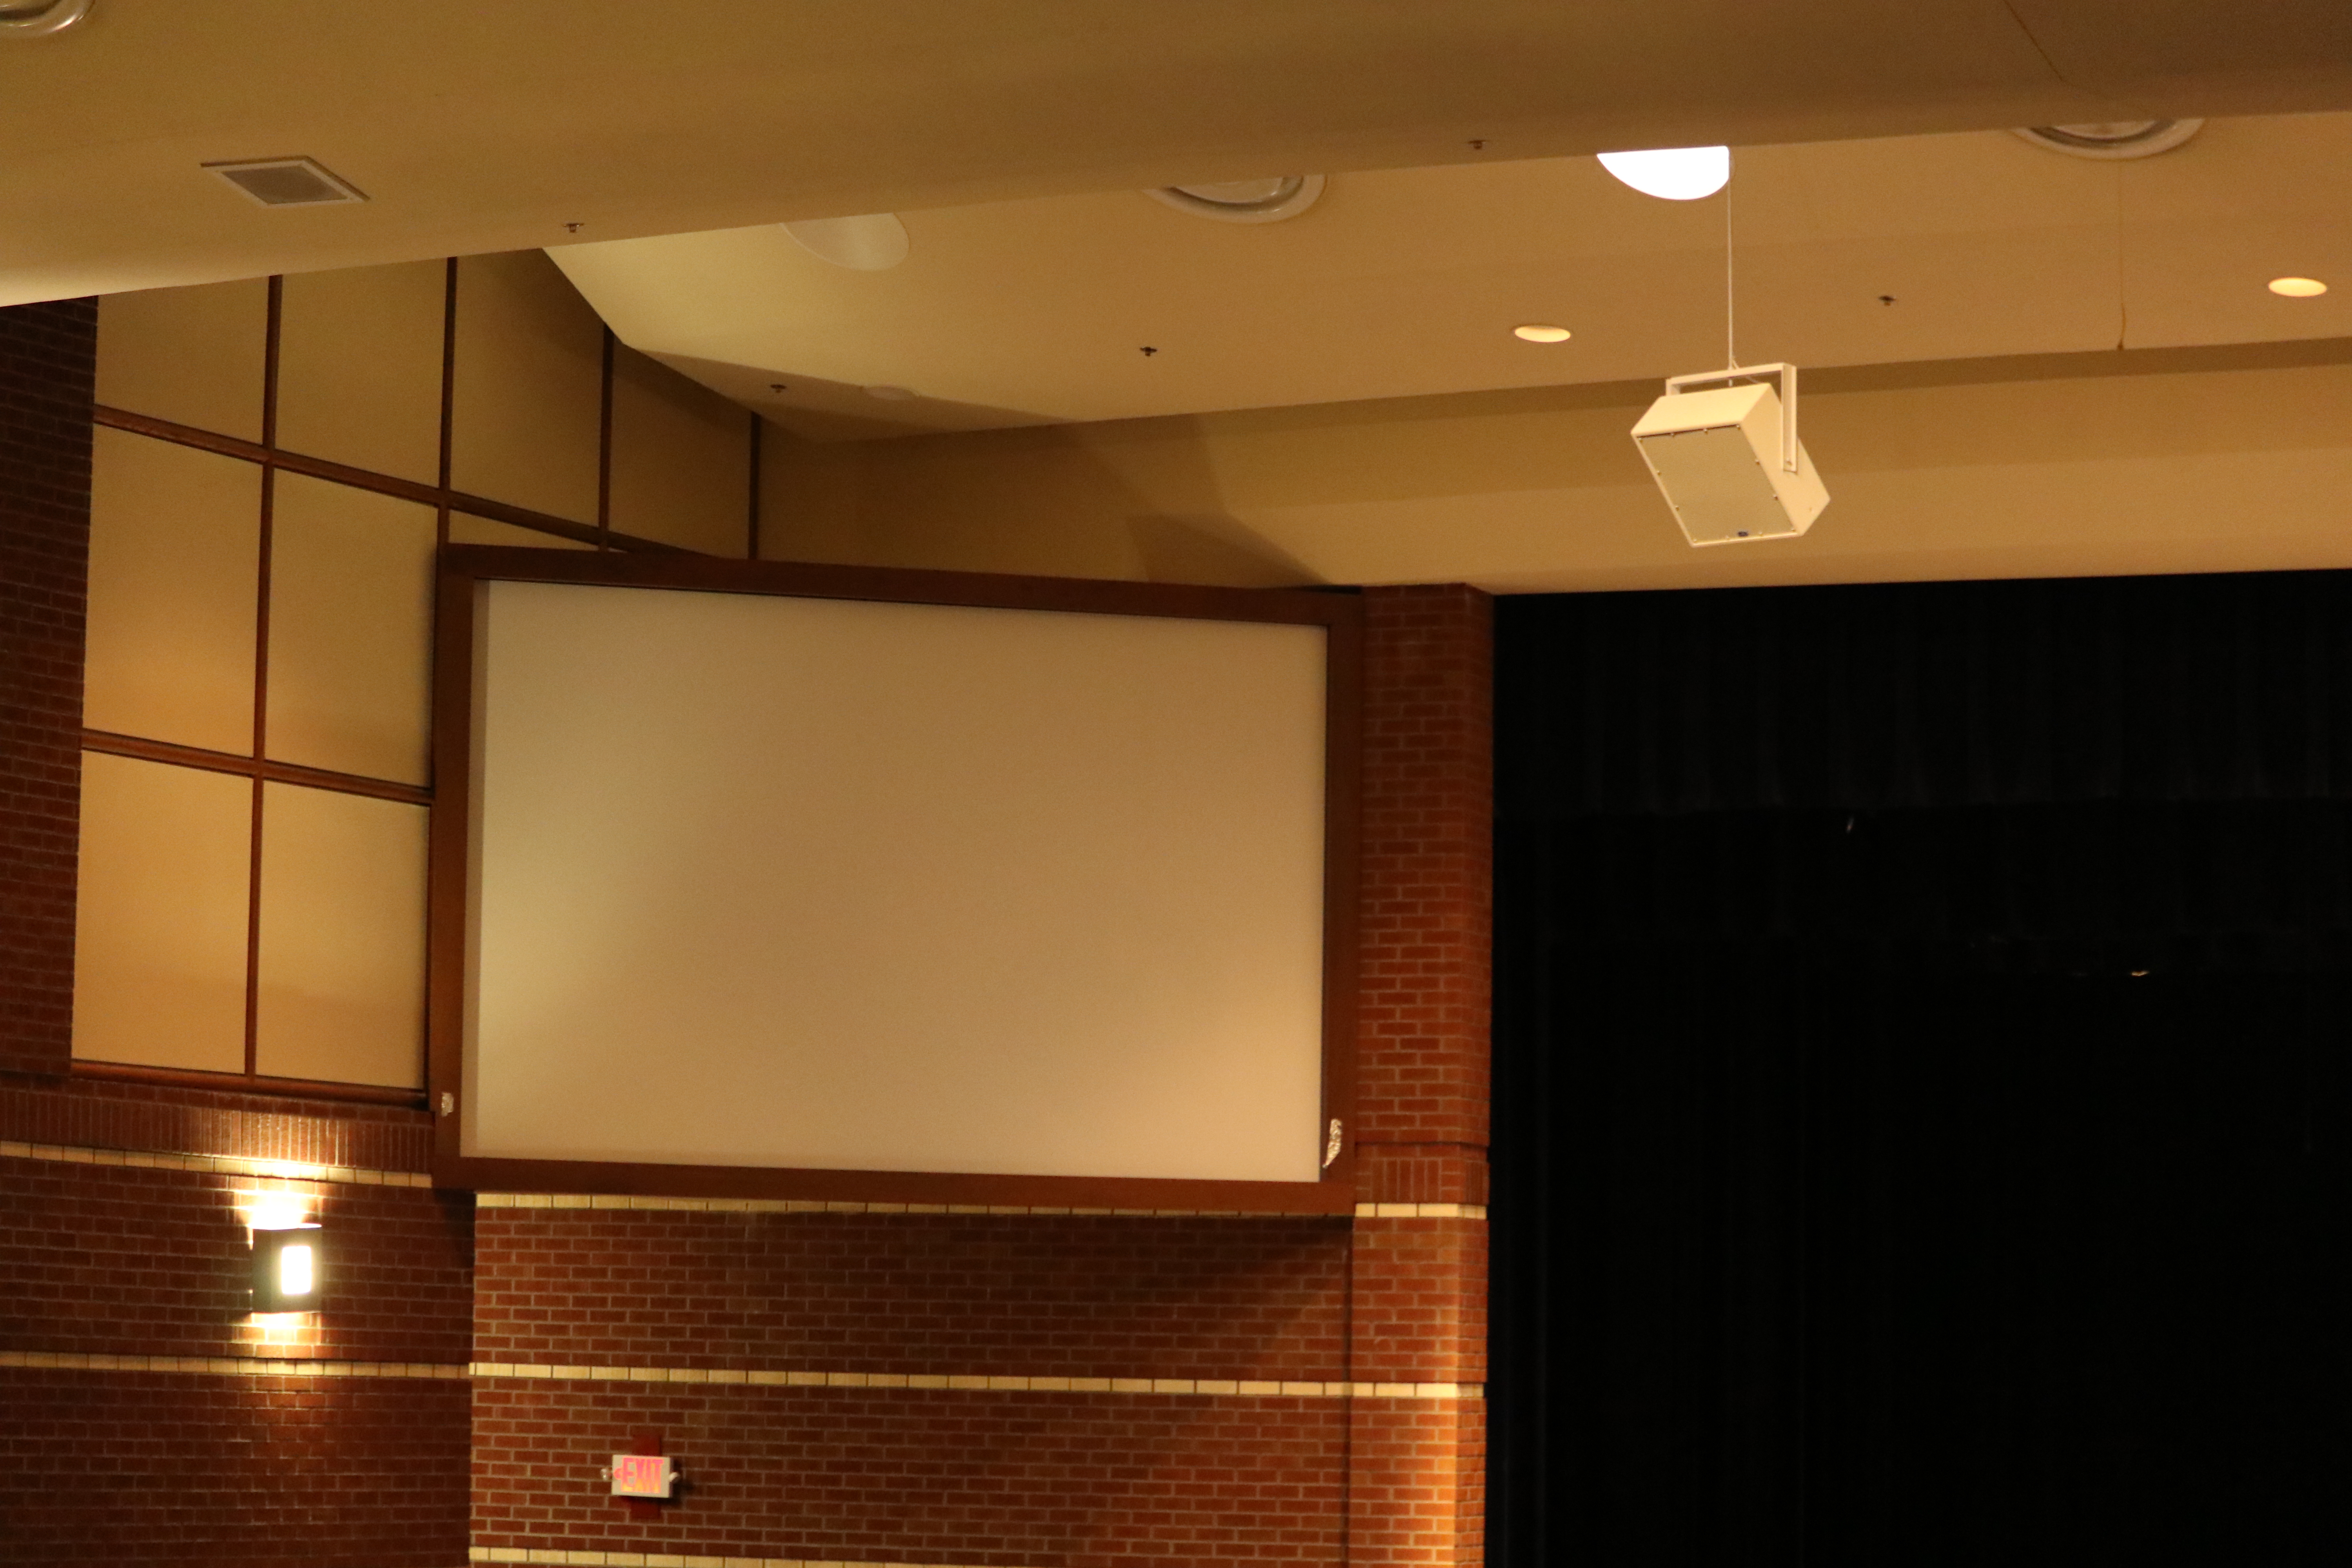 Auditorium audio/visual equipment updates Date approved by the board: Nov. 12, 2018 Cost: $264,185